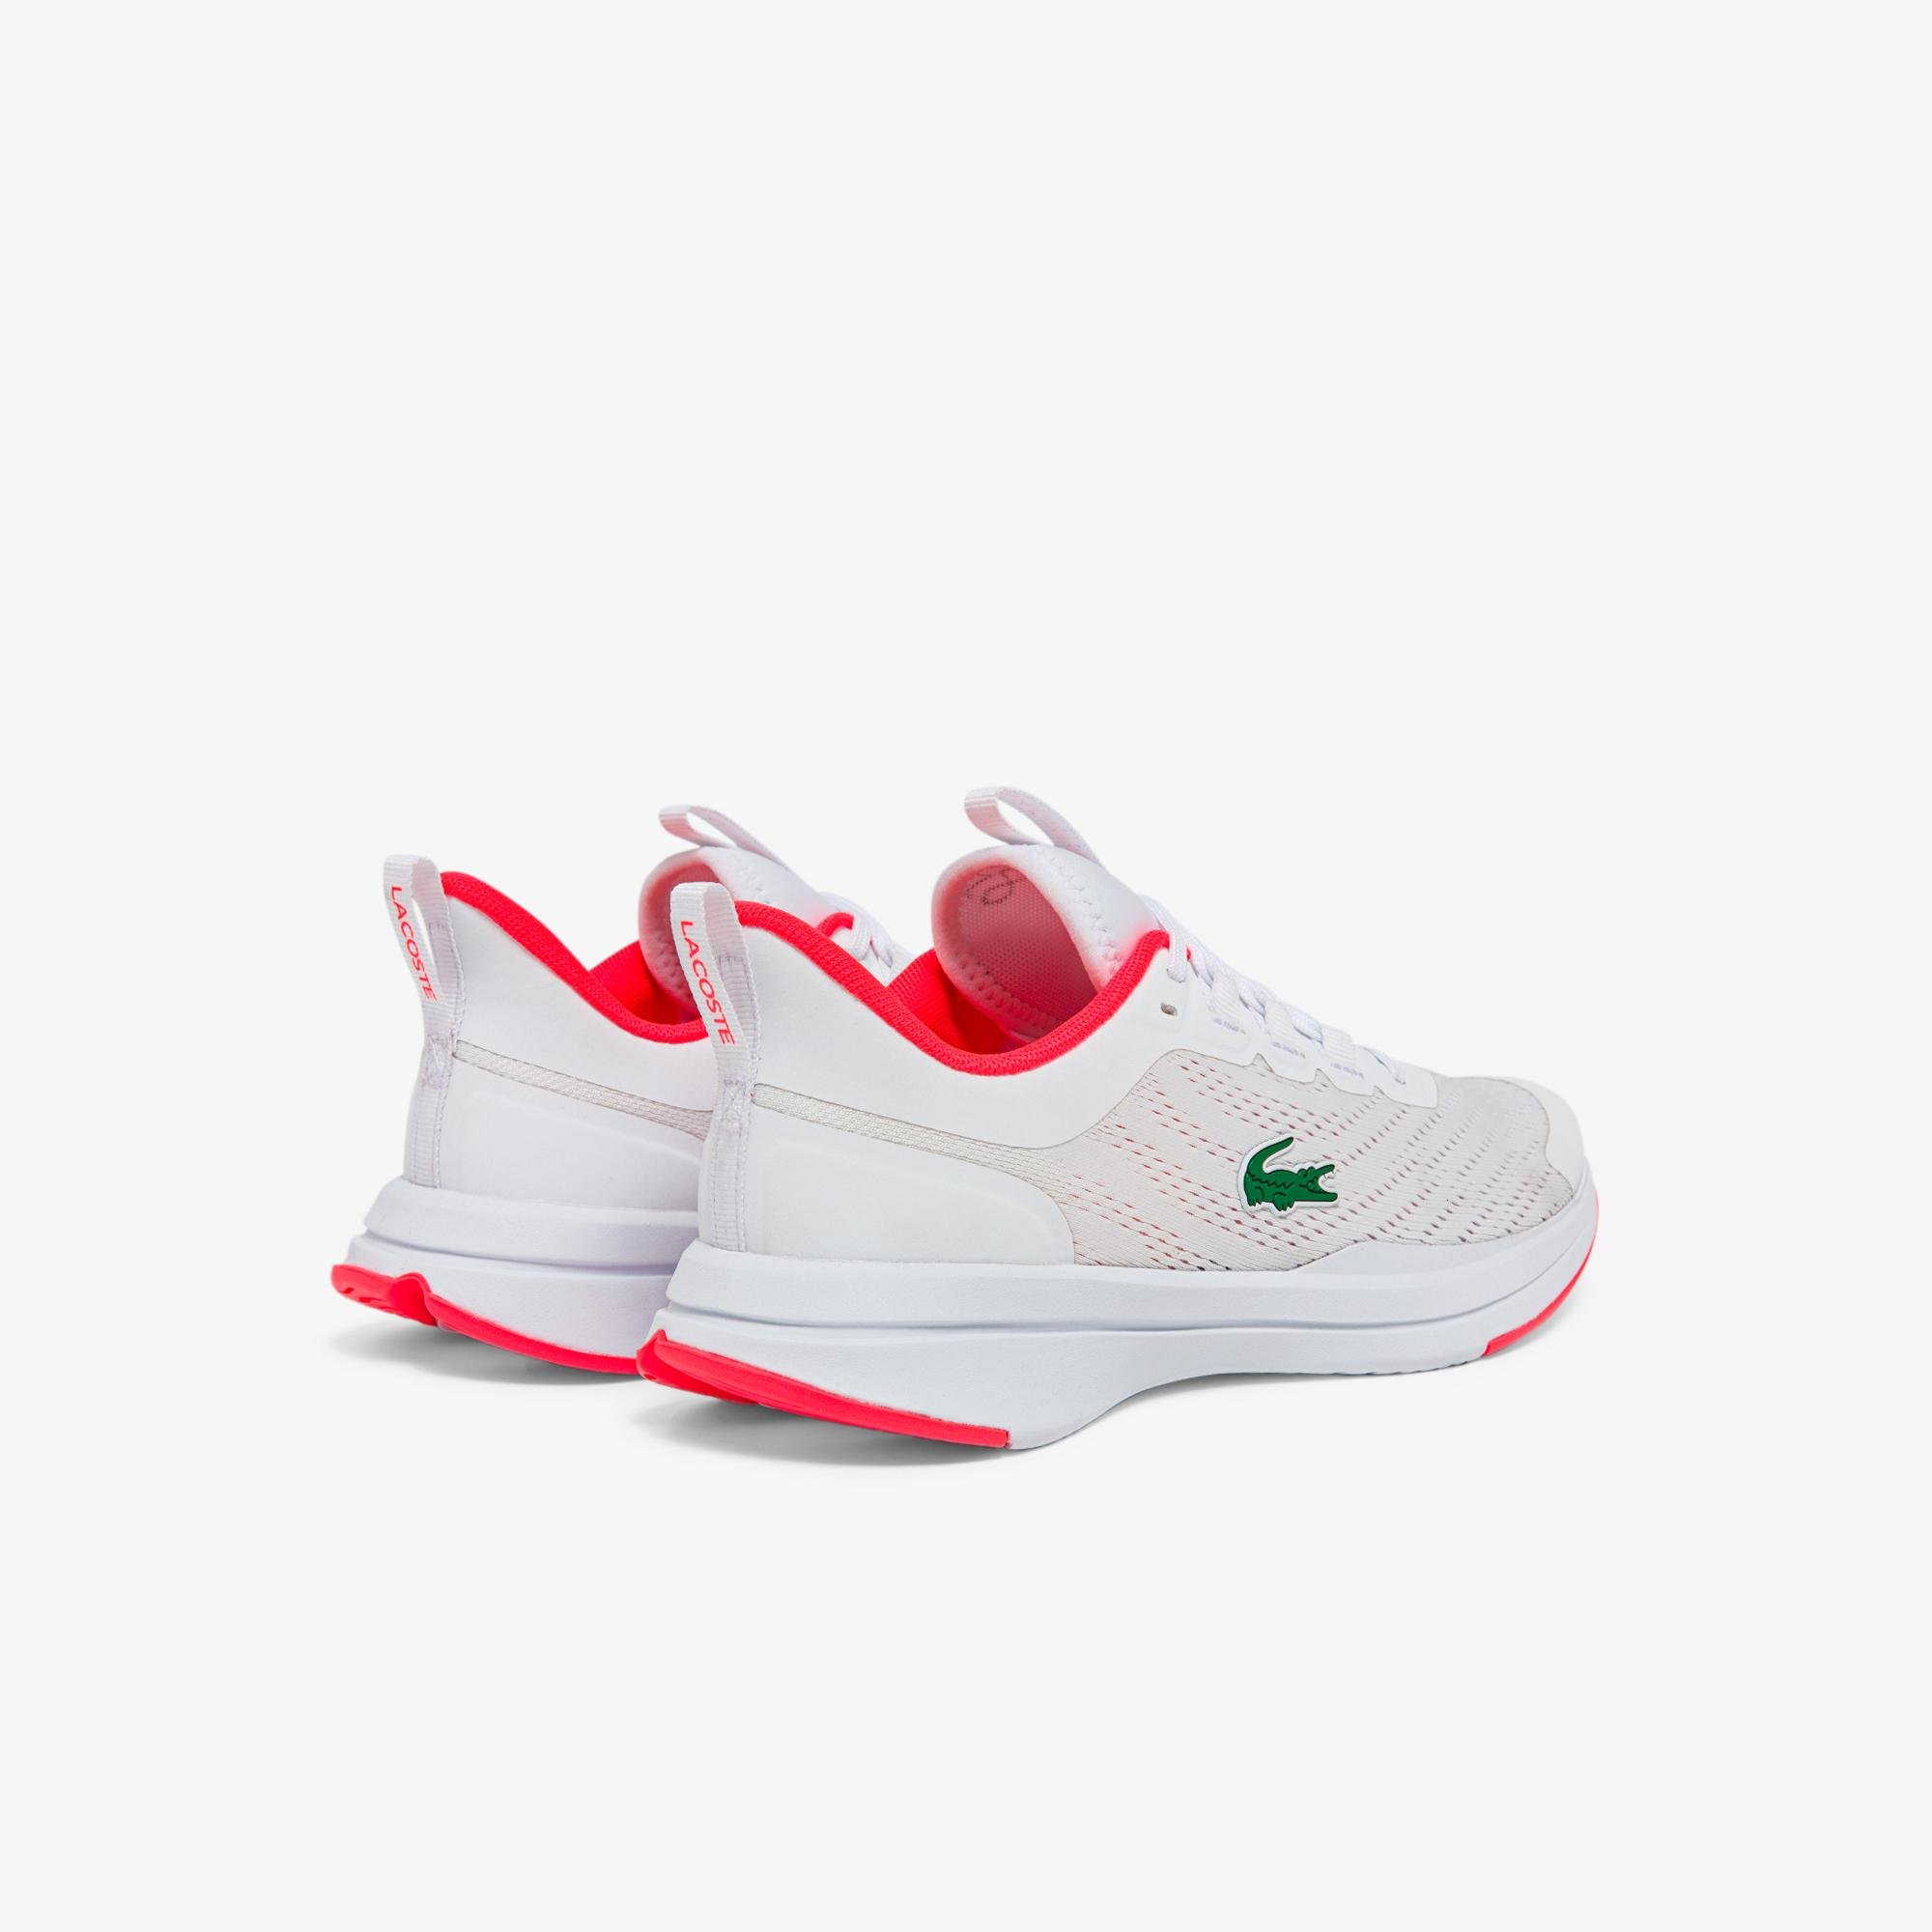 Lacoste Women's Run Spin Textile Trainers